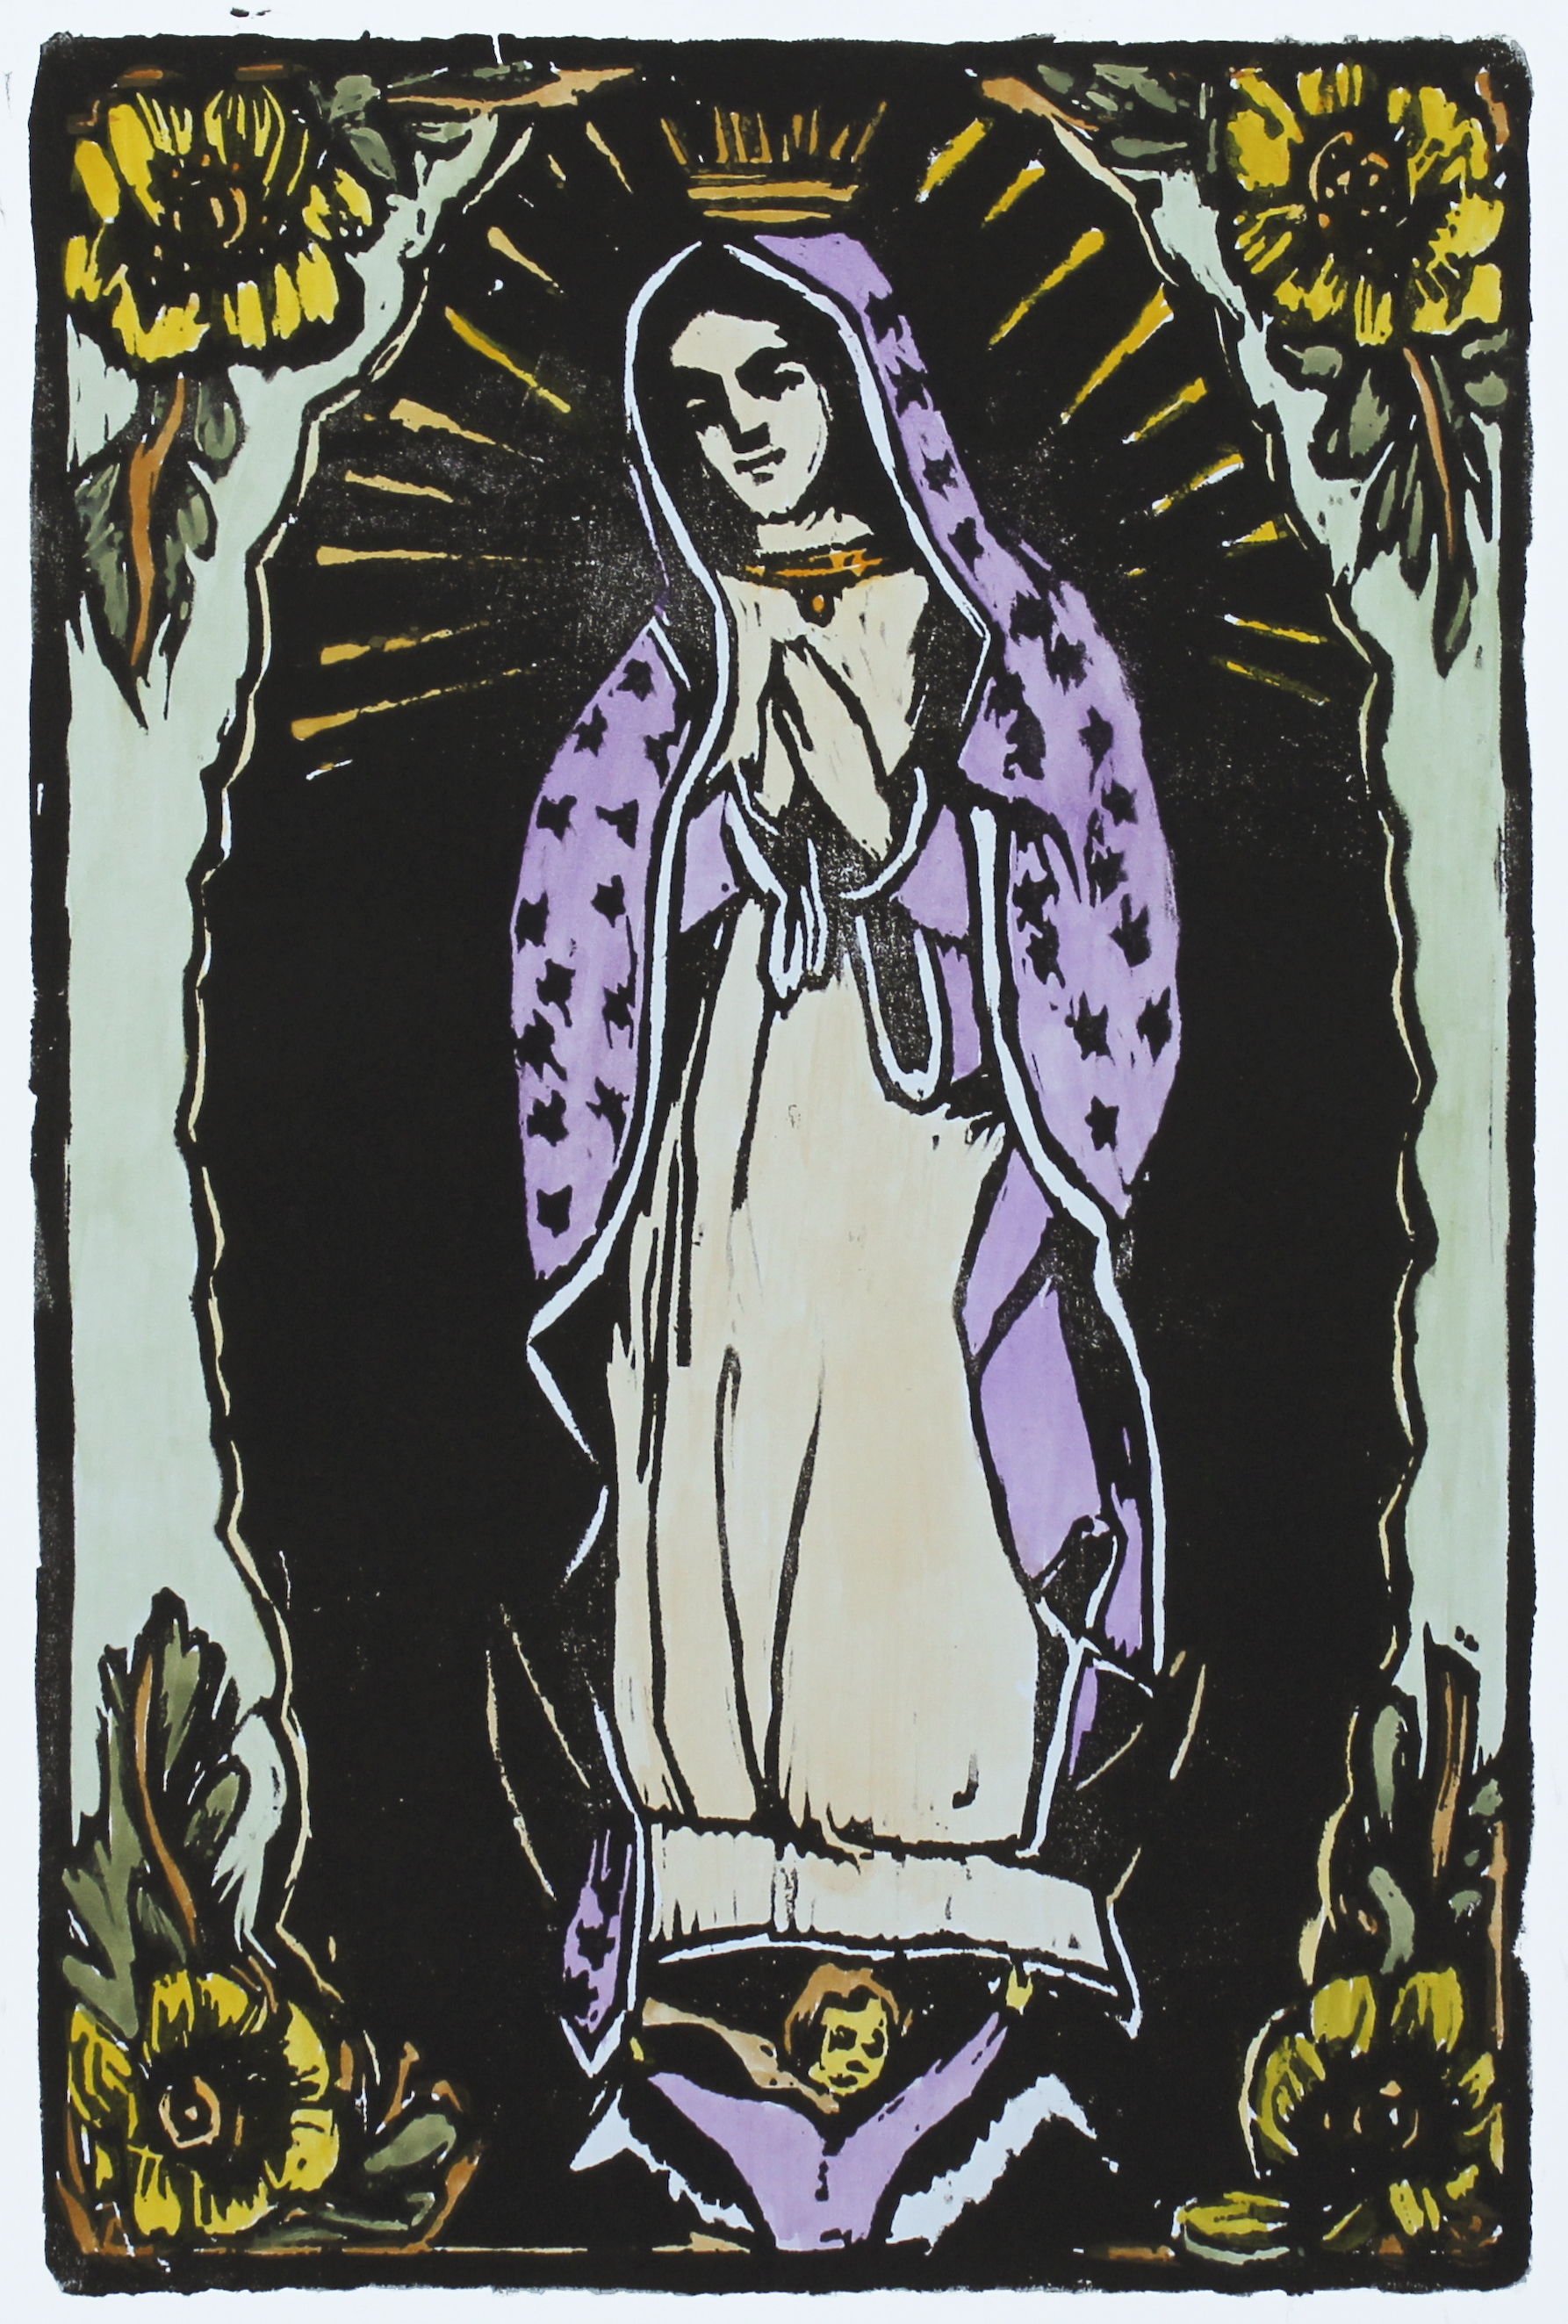   Our Lady of Guadalupe   woodblock print with hand-coloring  edition of 1  12x8"  2017 